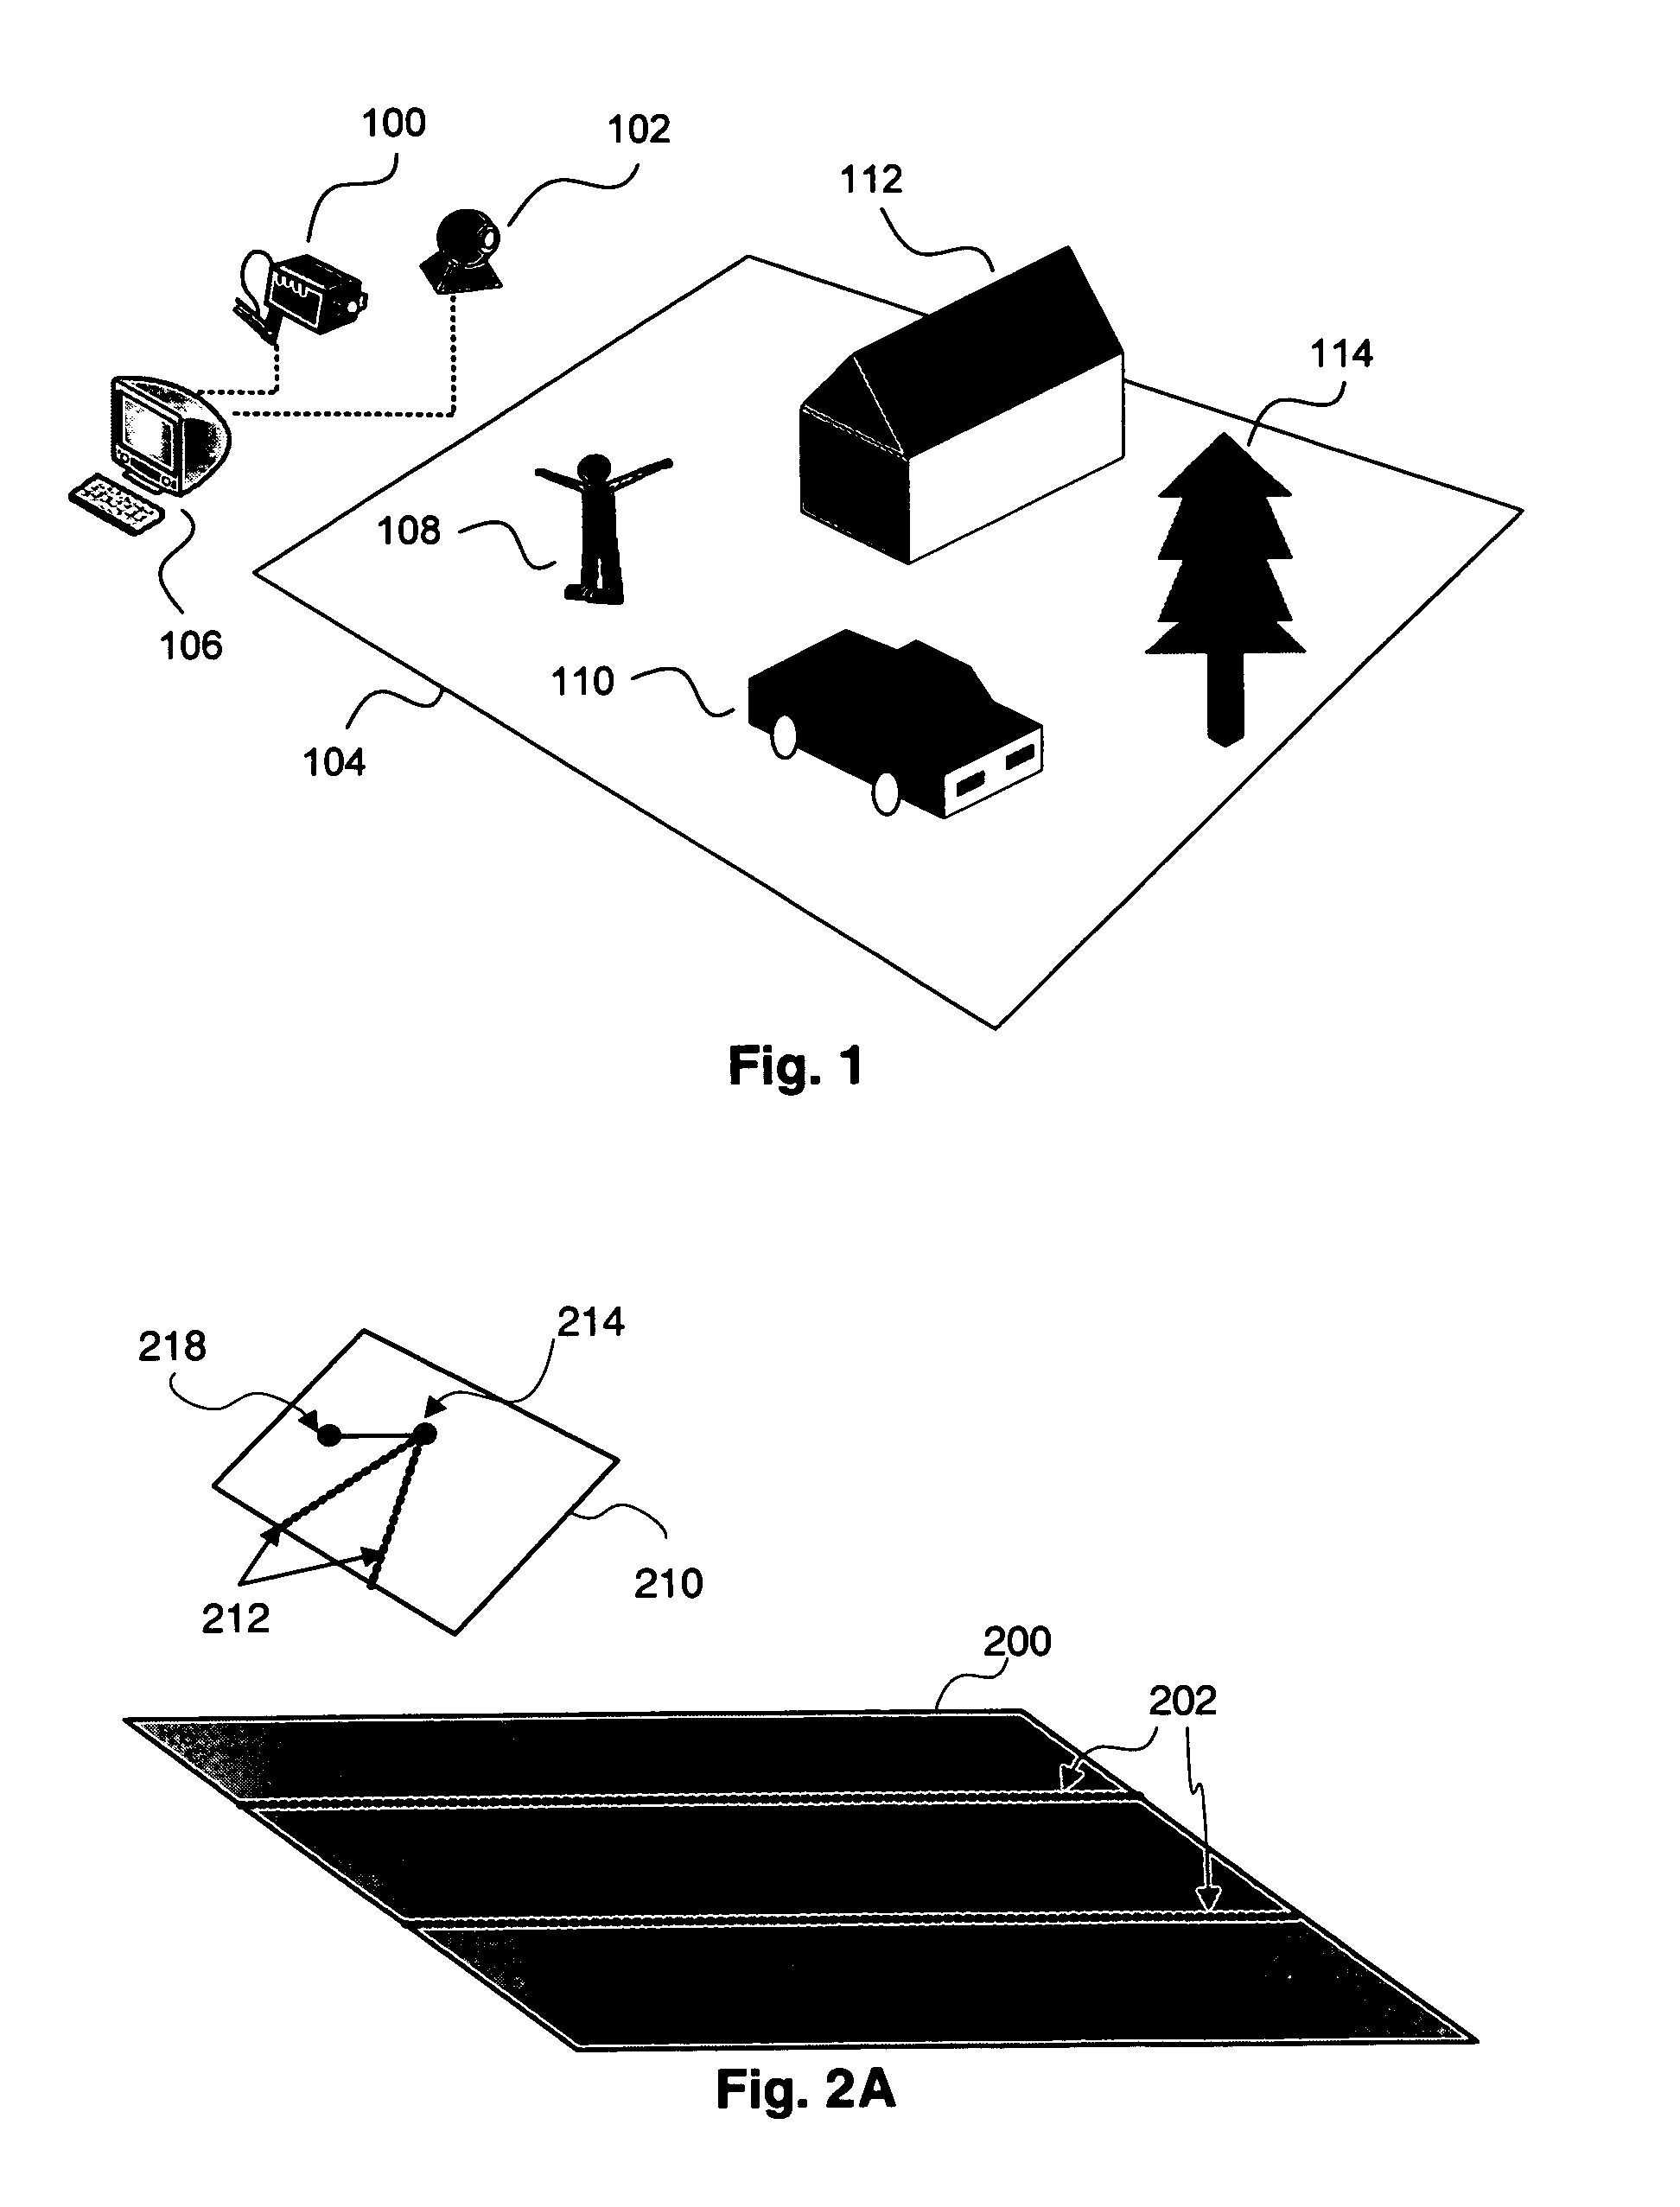 Systems and methods for object dimension estimation